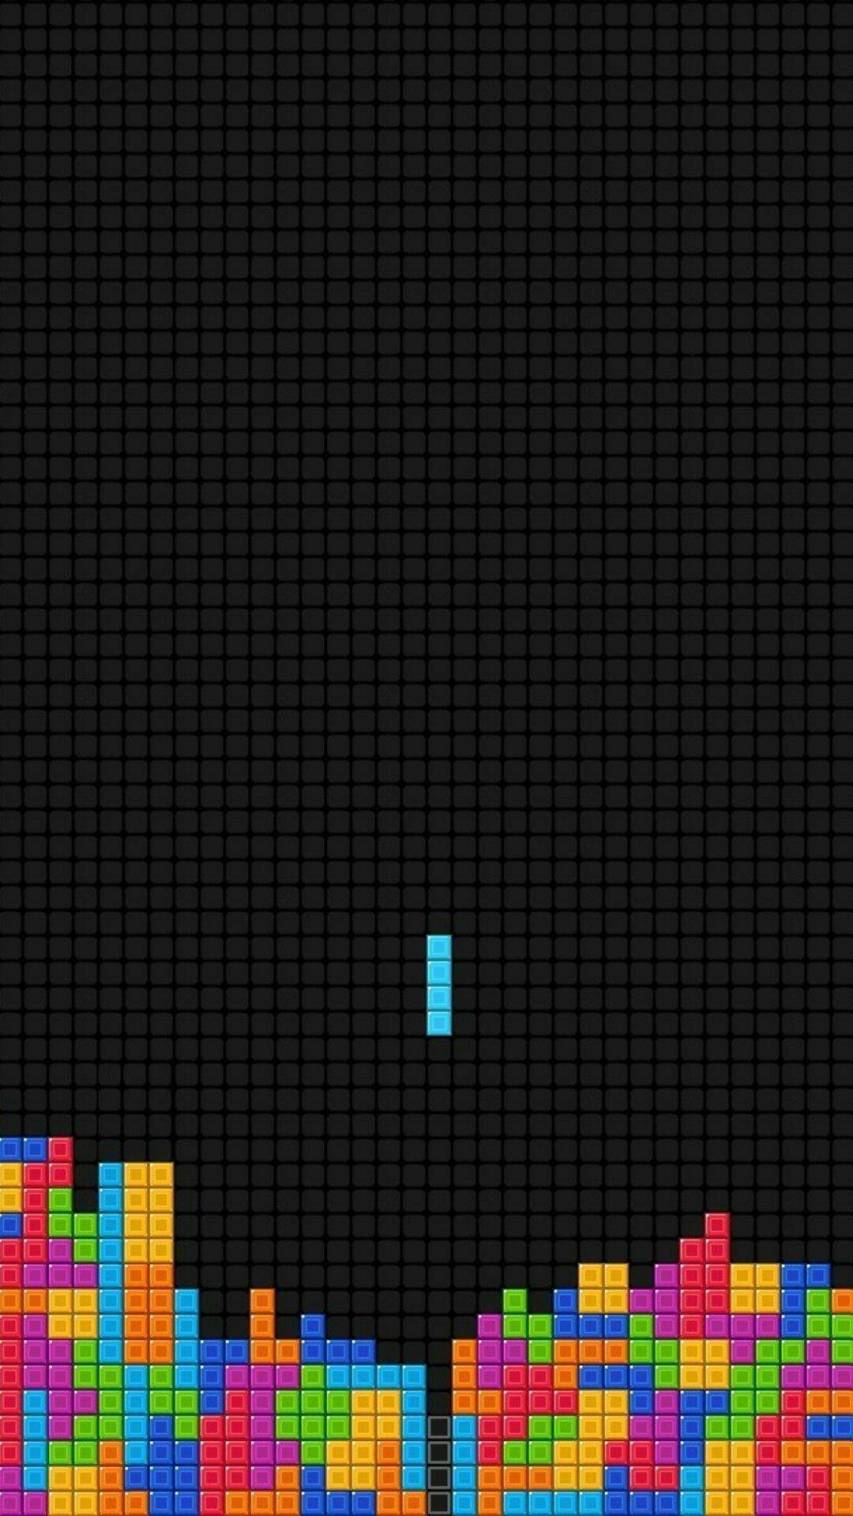 Awesome Retro Games Pictures for iPhone